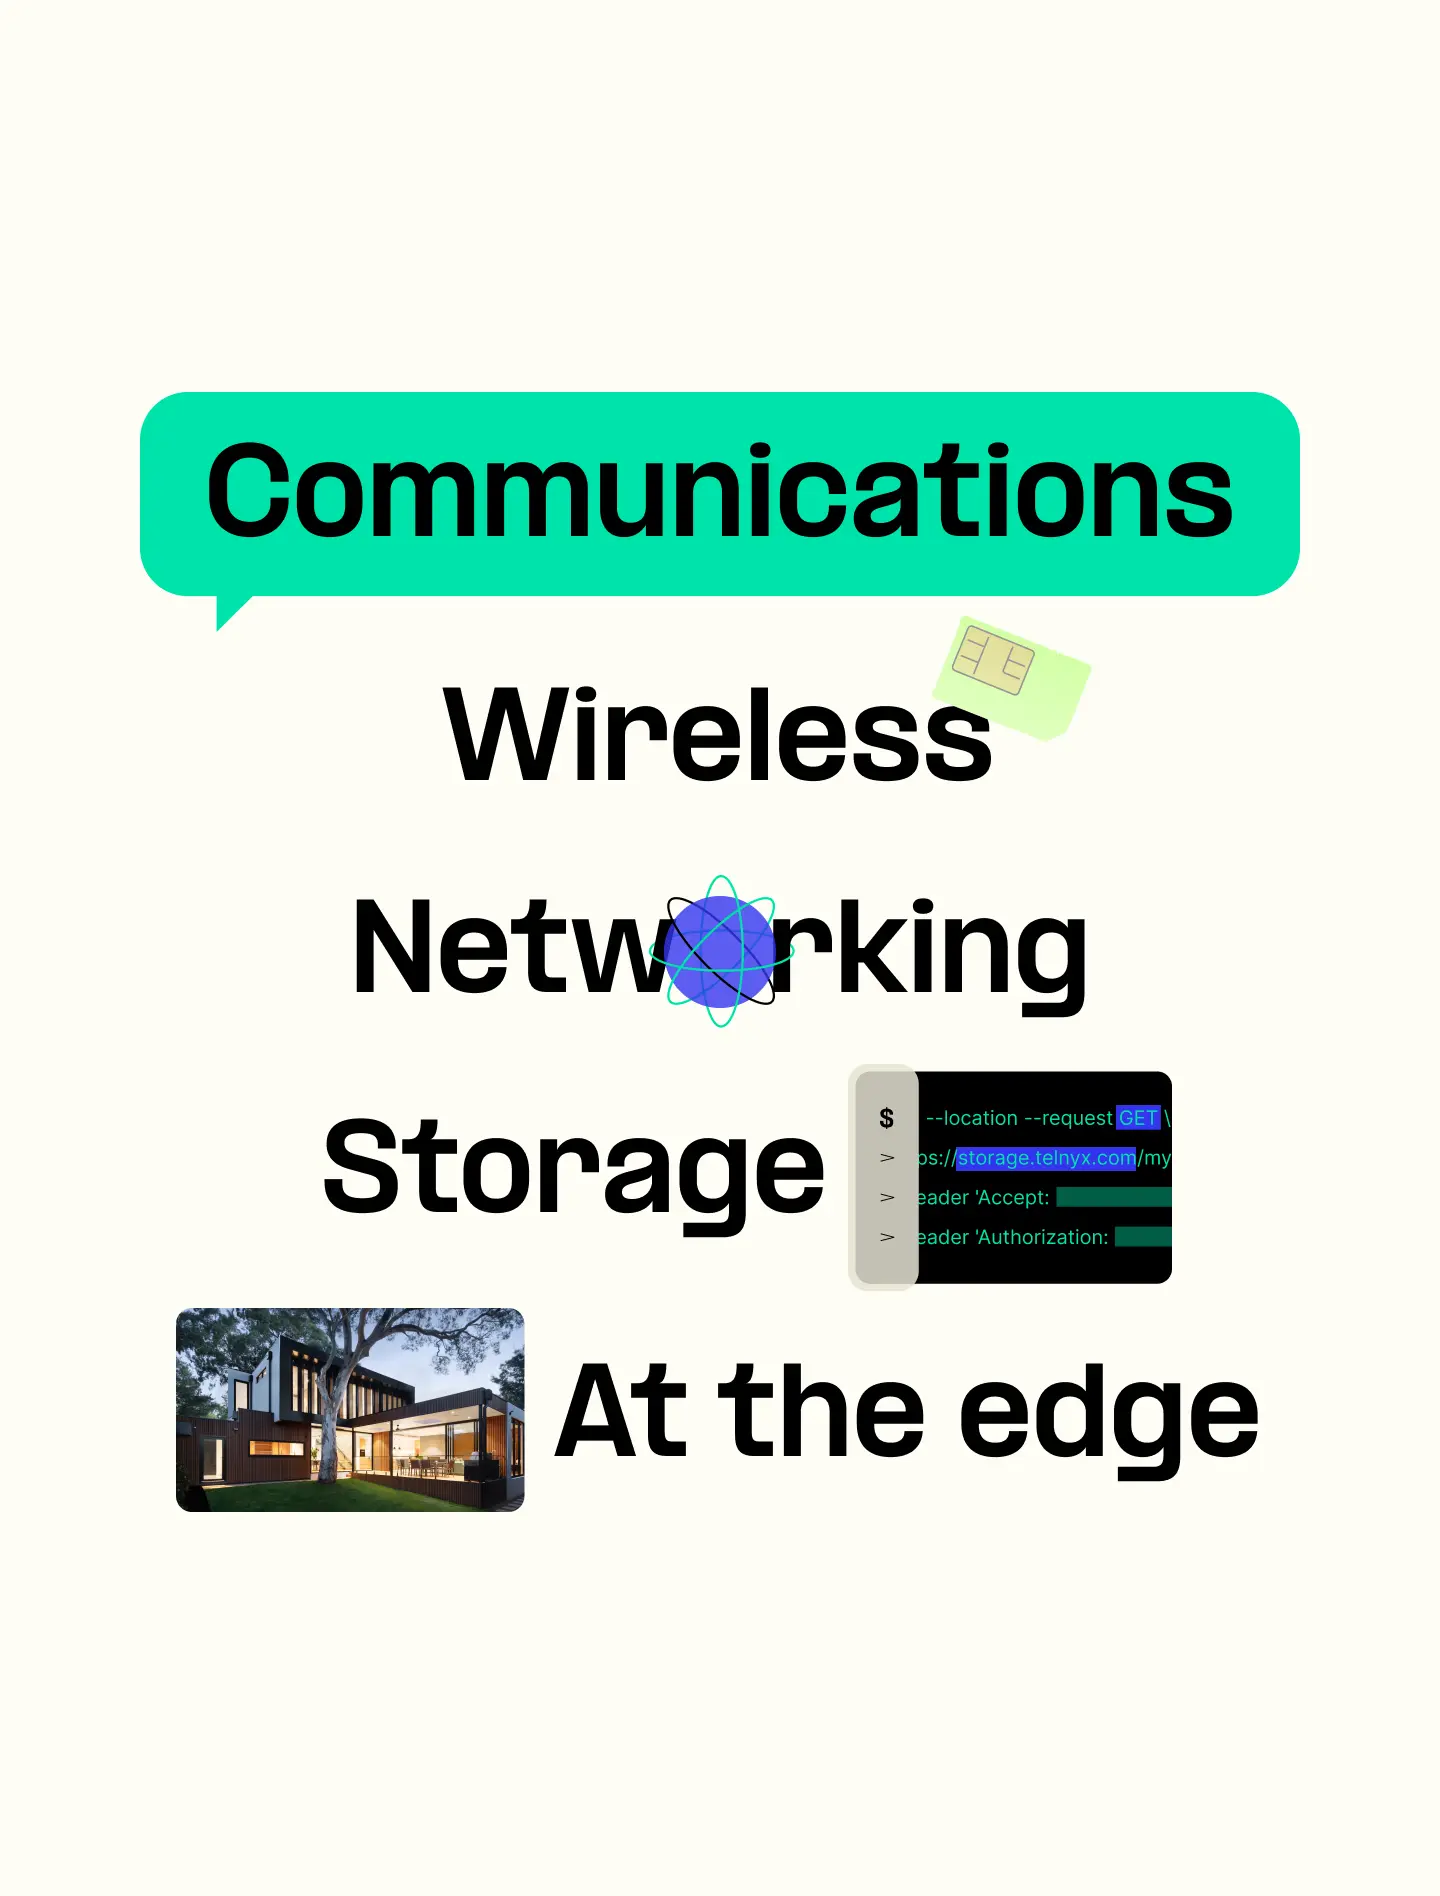 Communications, wireless, networking and storage, at the edge.